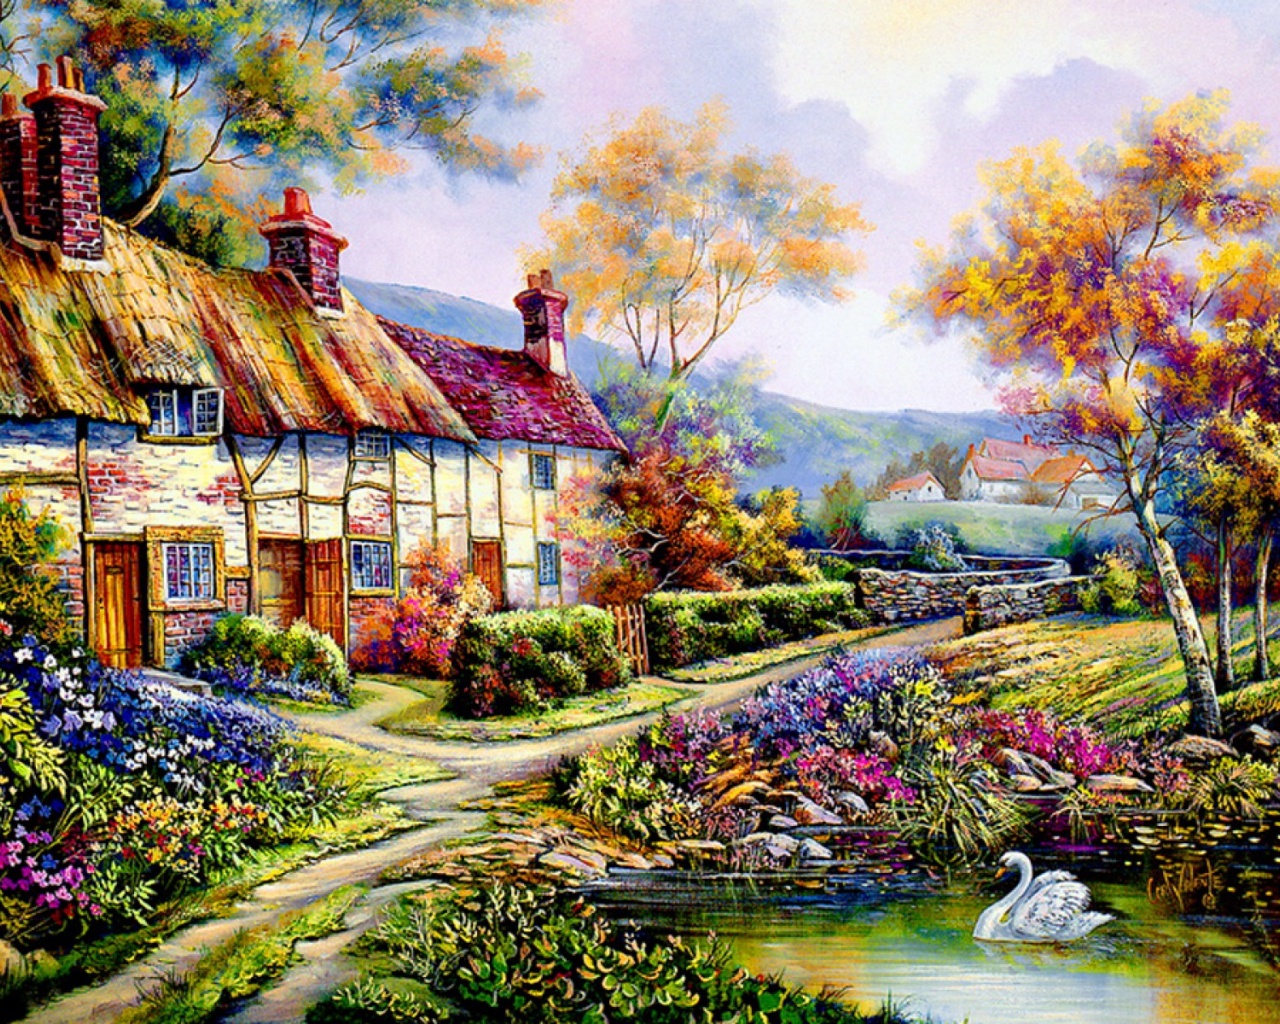 Cottage In The Countryside 823703 Hd Wallpaper Backgrounds